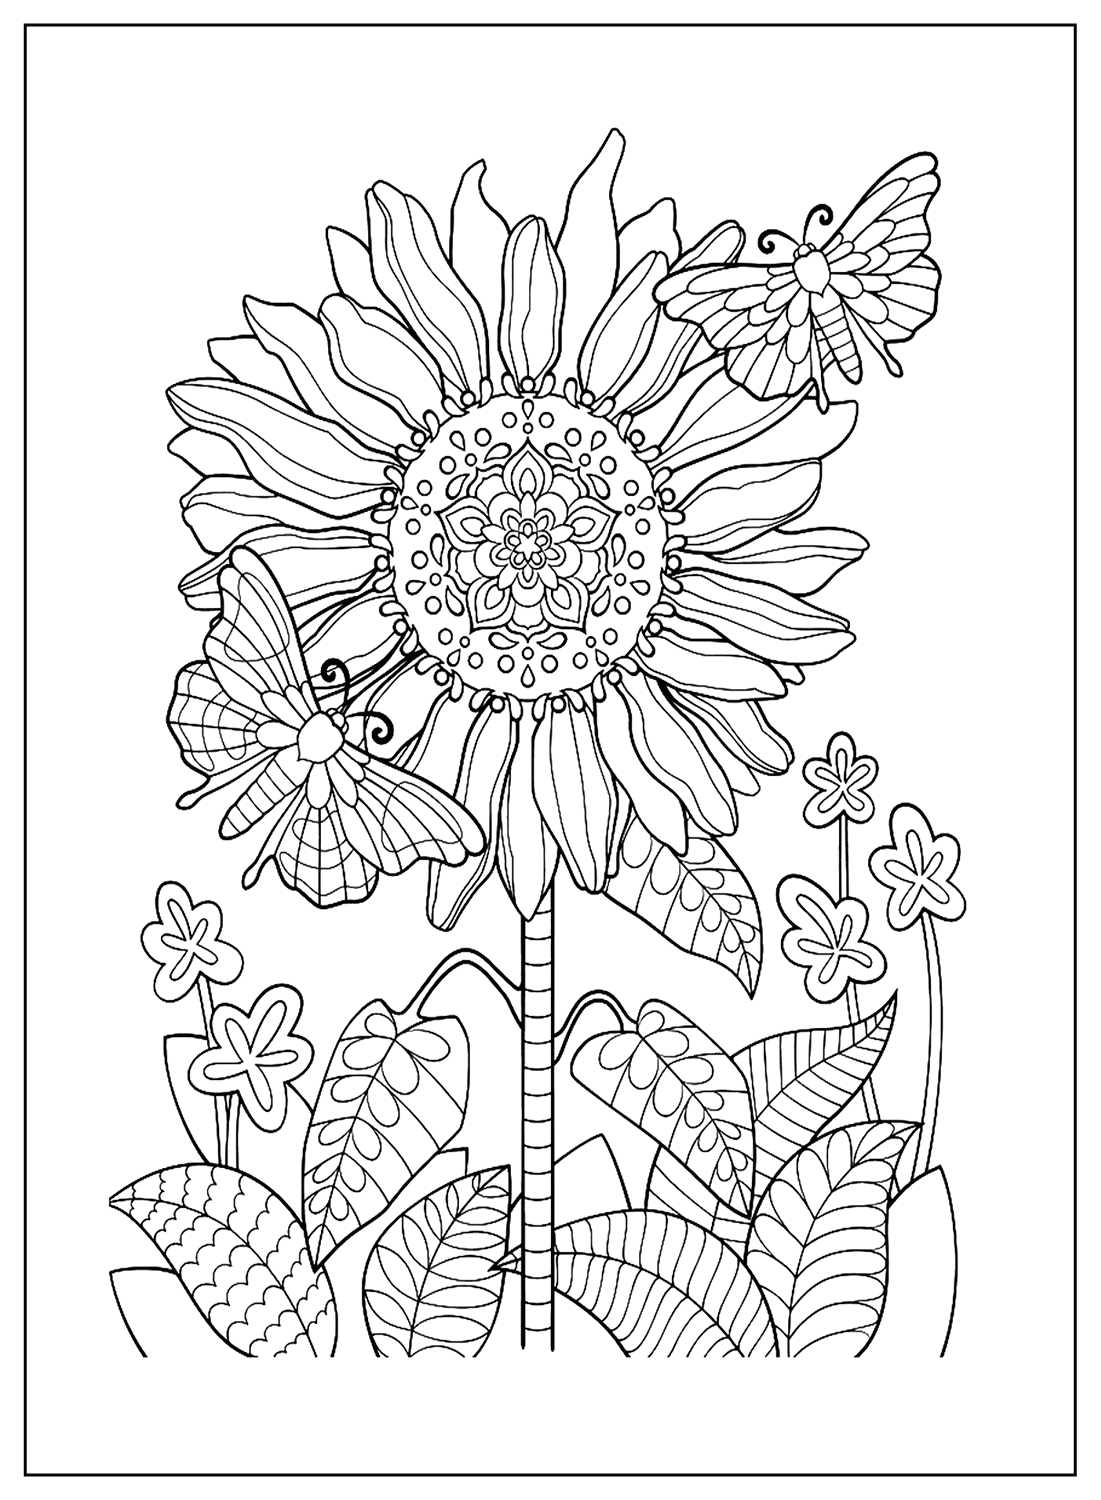 Mandala Spring Coloring Page from Spring